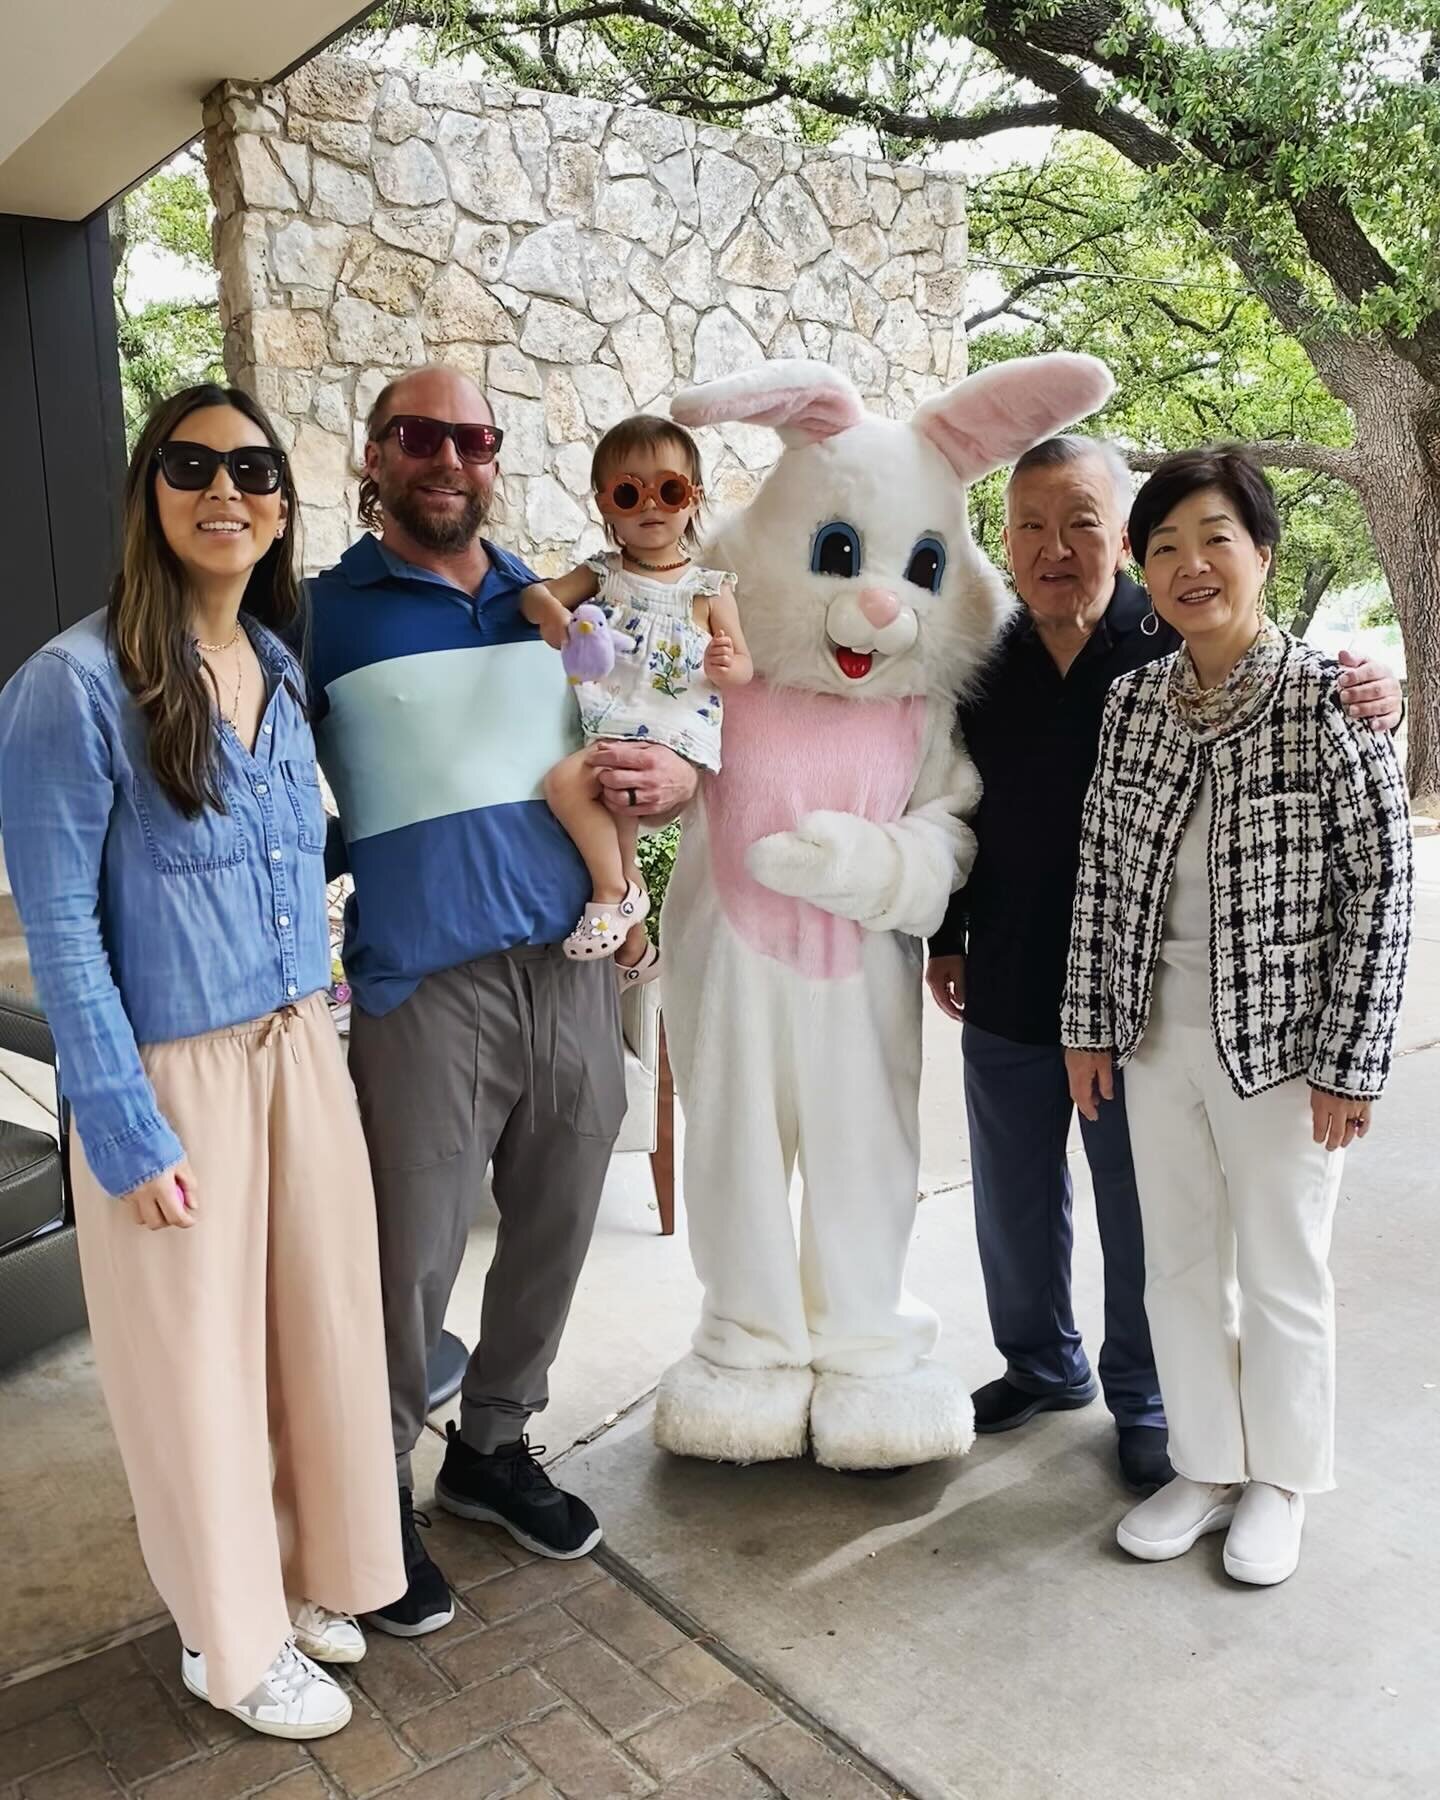 We barely made it through brunch but we were able to squeeze in a few family pictures, thanks to the Easter Bunny. 🤪 Happy Easter everyone!  May this season bring you hope for a second chance or a new beginning in Him ✝️❤️🪺

#happyeaster #easter202